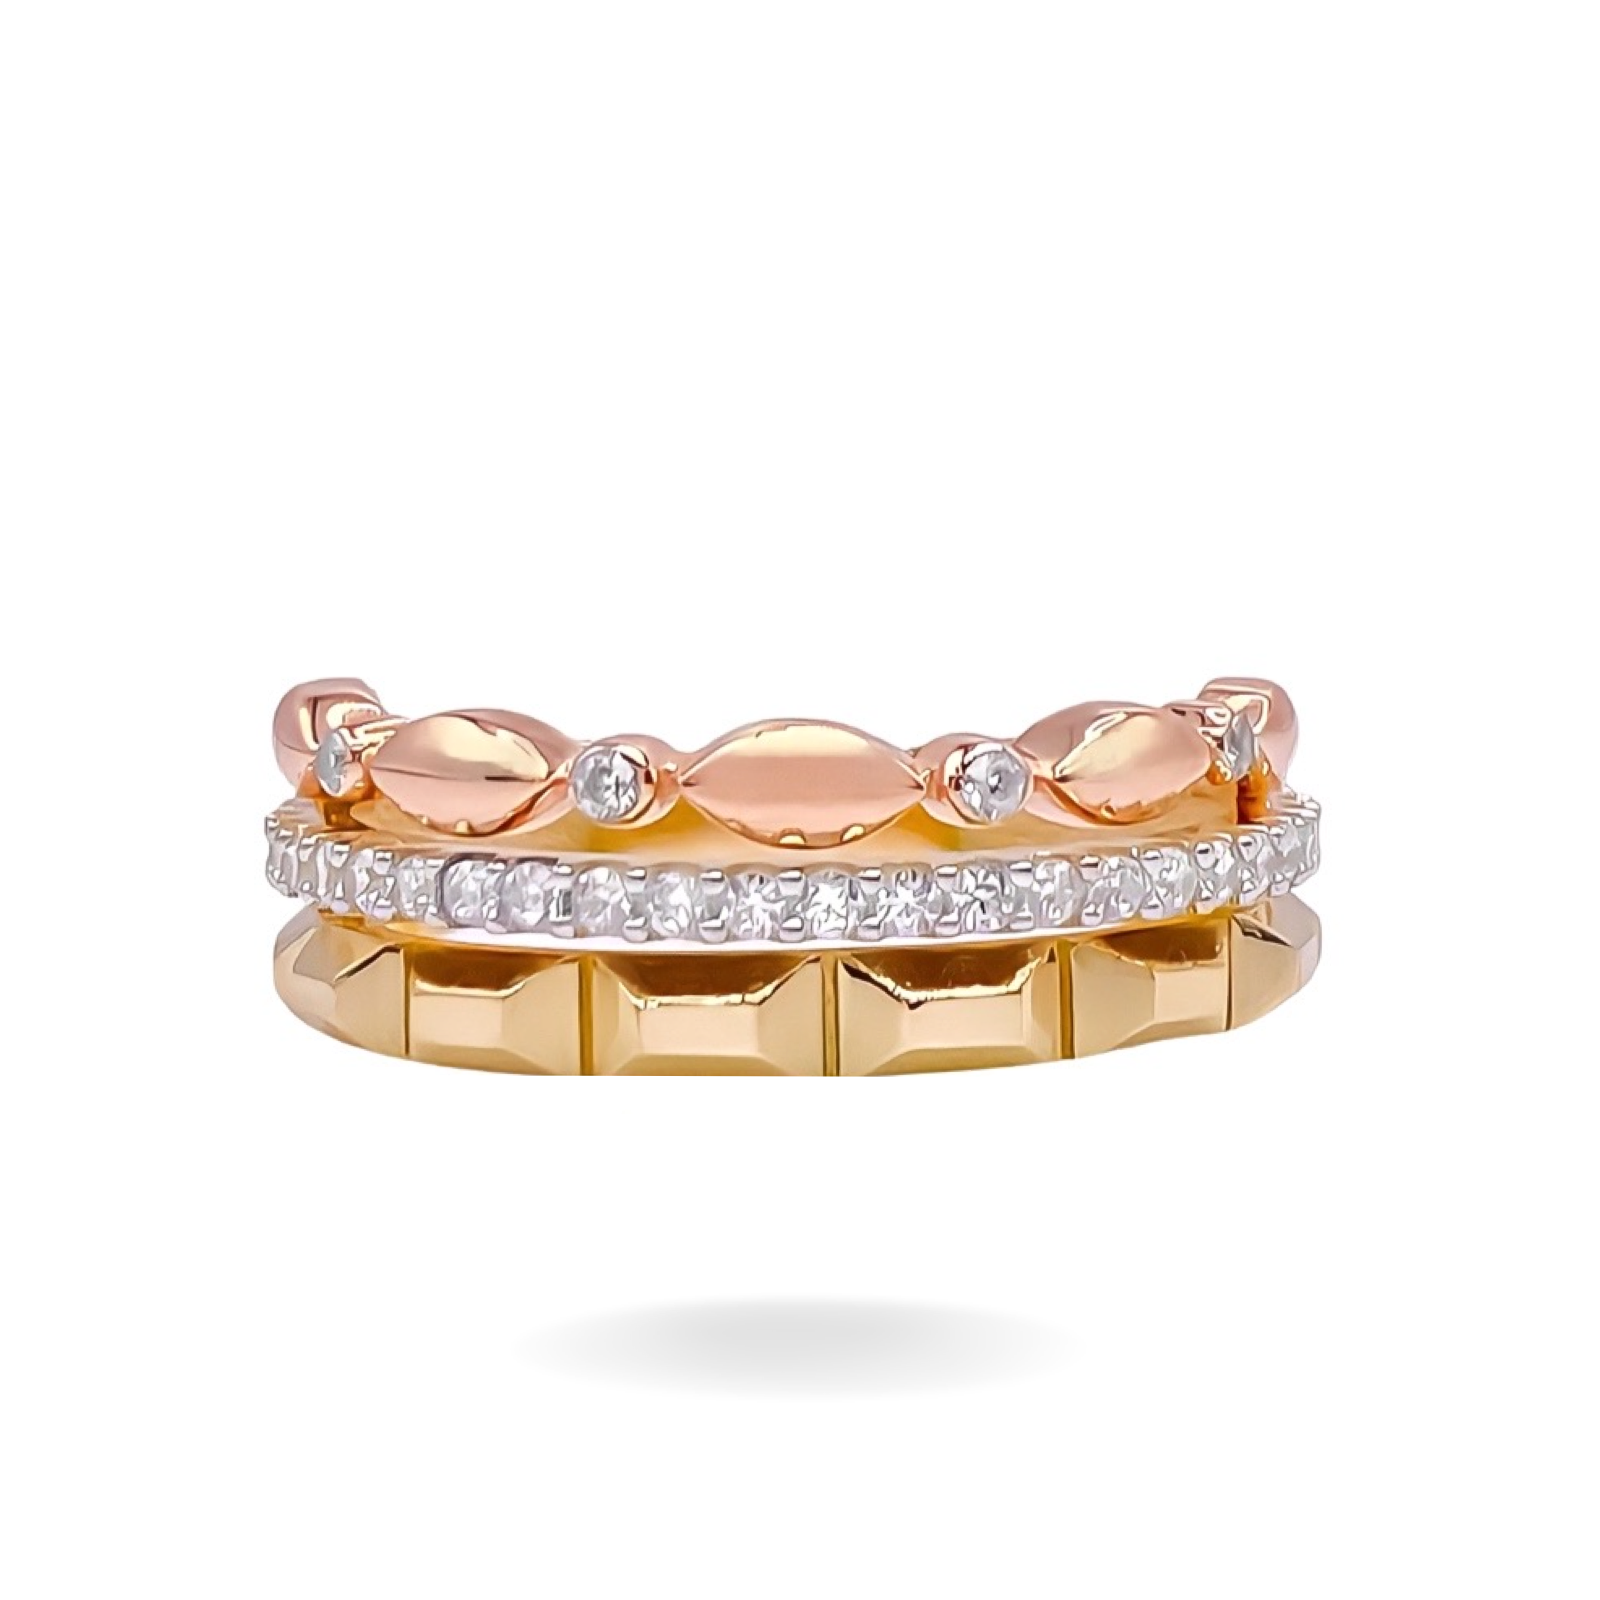 14K YELLOW/ROSE GOLD 3 IN 1 PATTERN PAVE RING